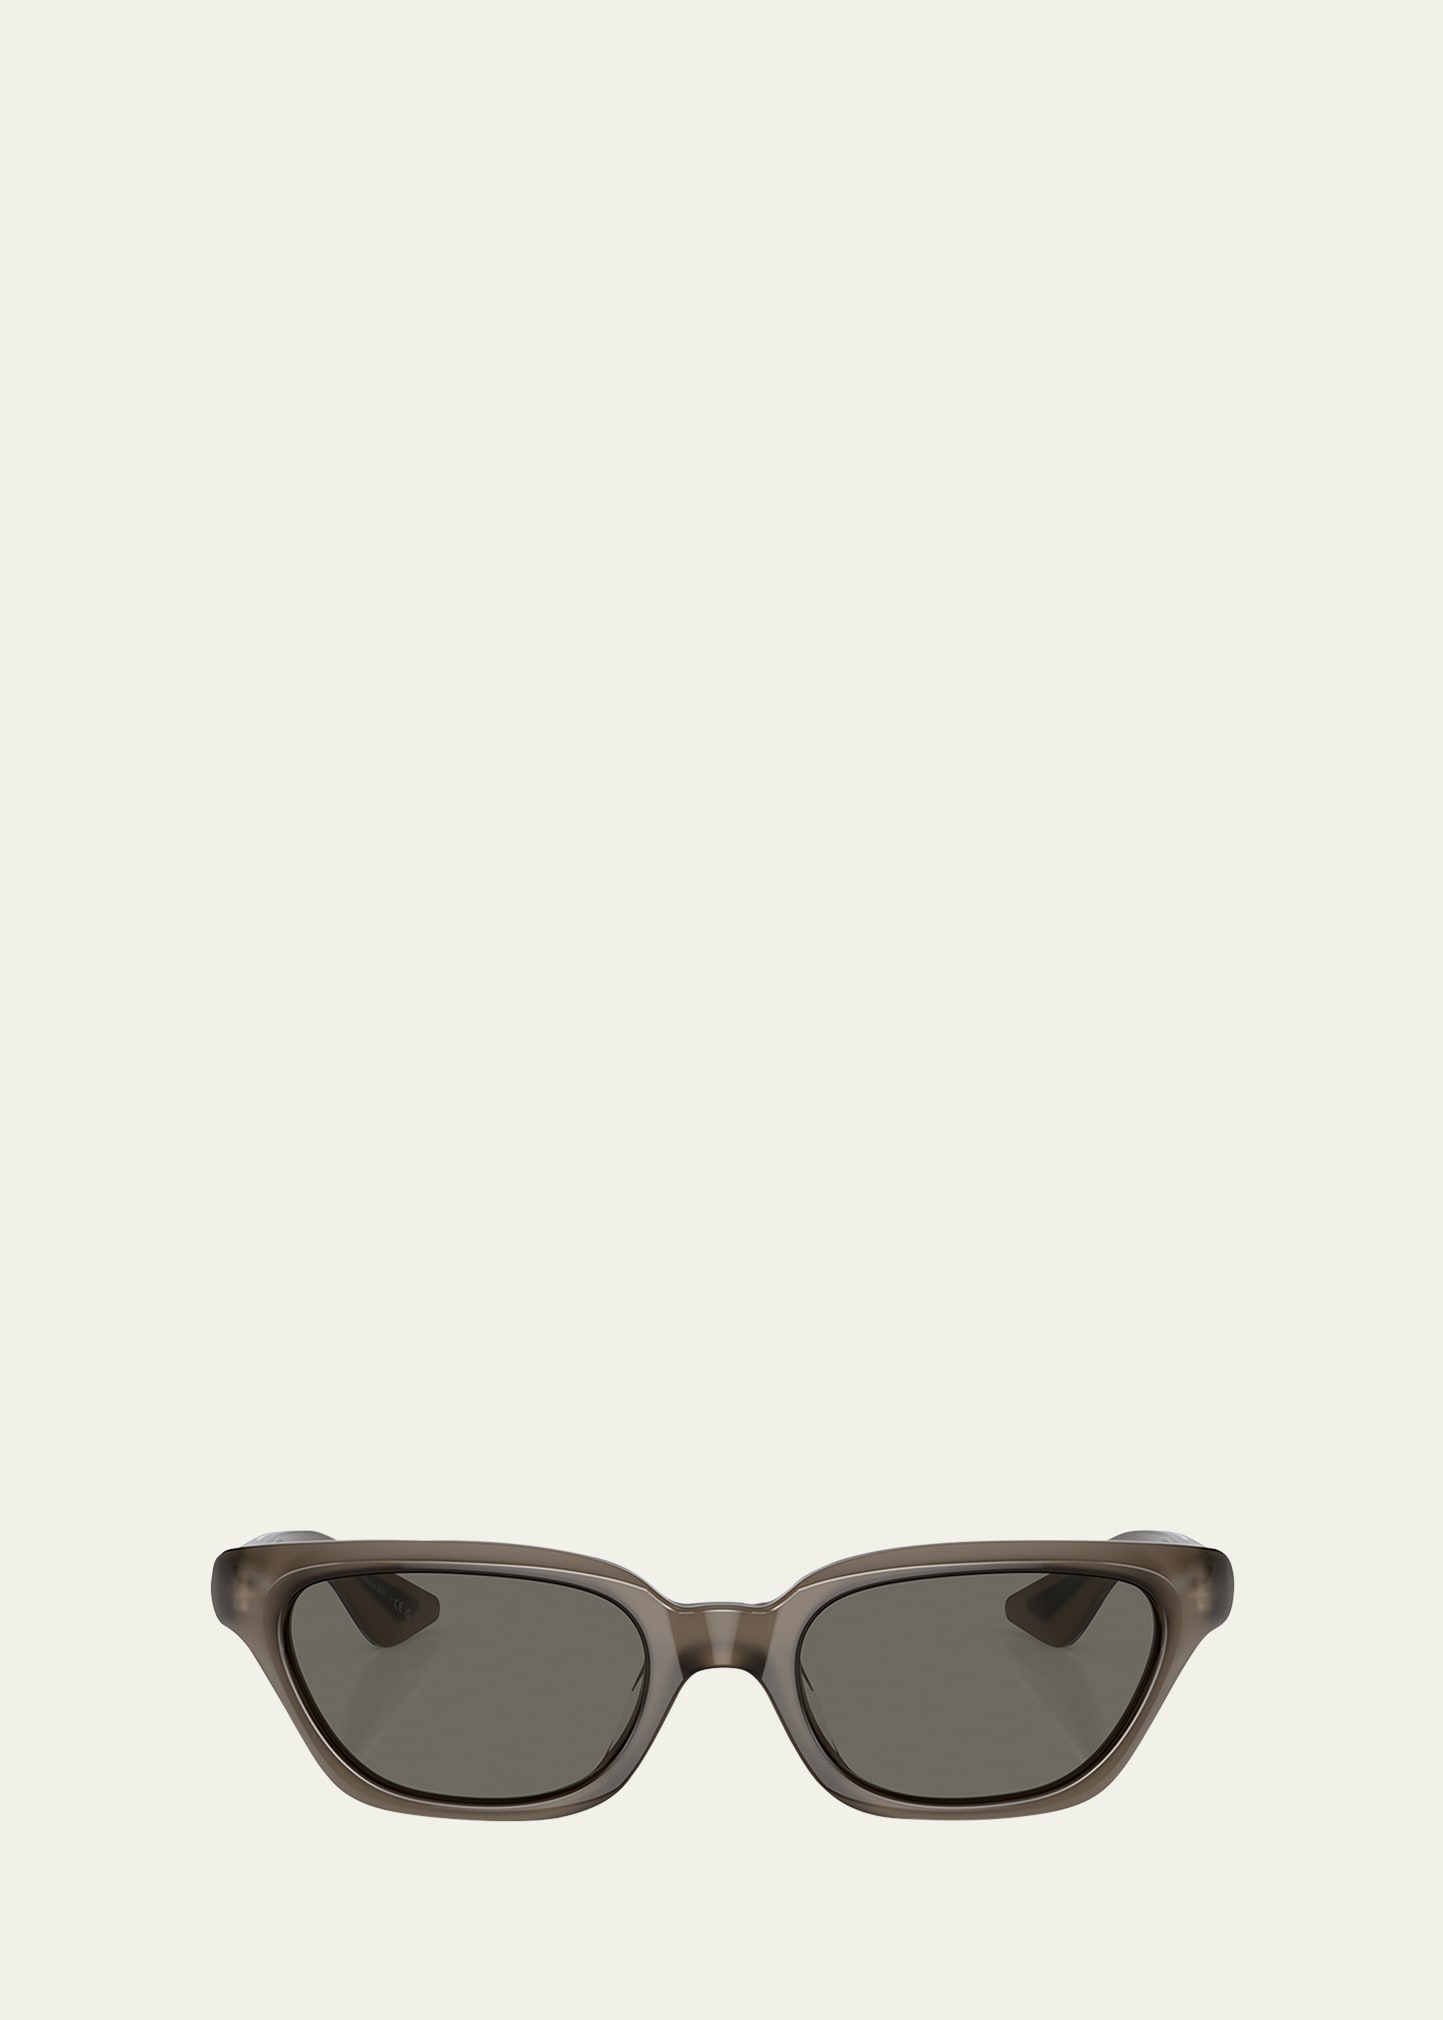 Khaite X Oliver Peoples Women's Oliver Peoples 1983c 52mm Geometric Sunglasses In Taupe